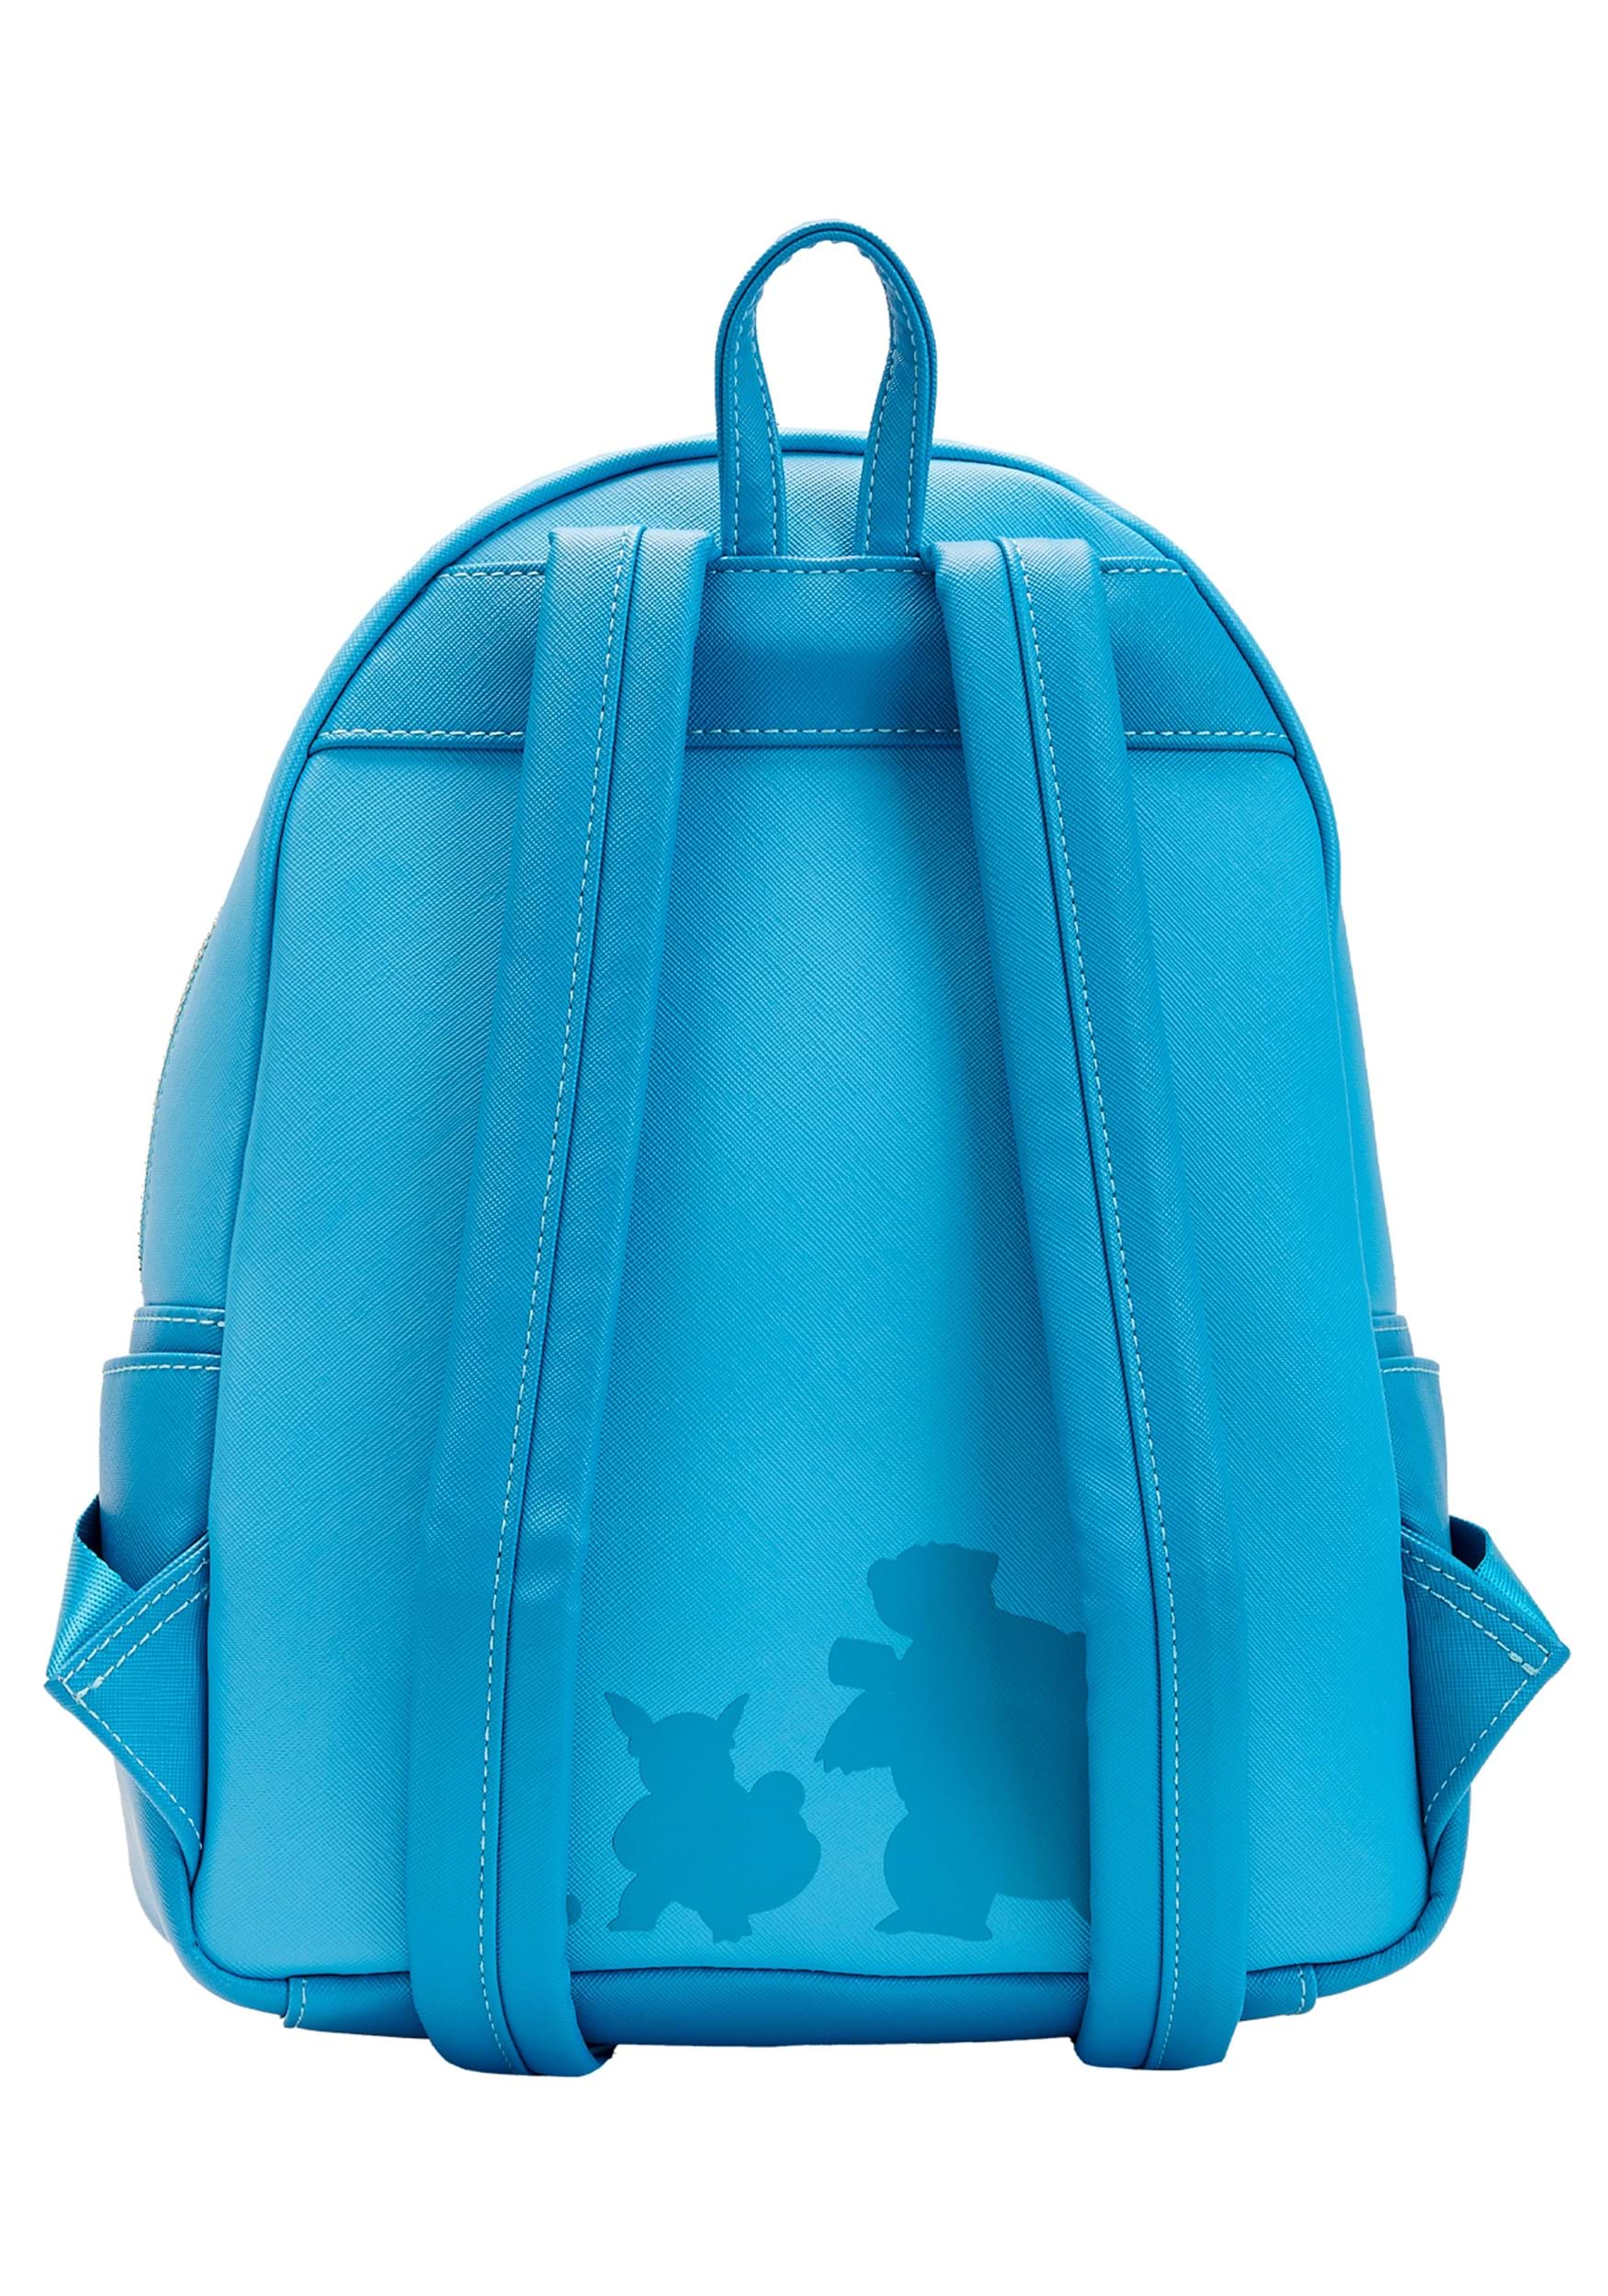 LOUNGEFLY POKEMON TEAL MINI BACKPACK WITH WALLET NEW WITH TAGS